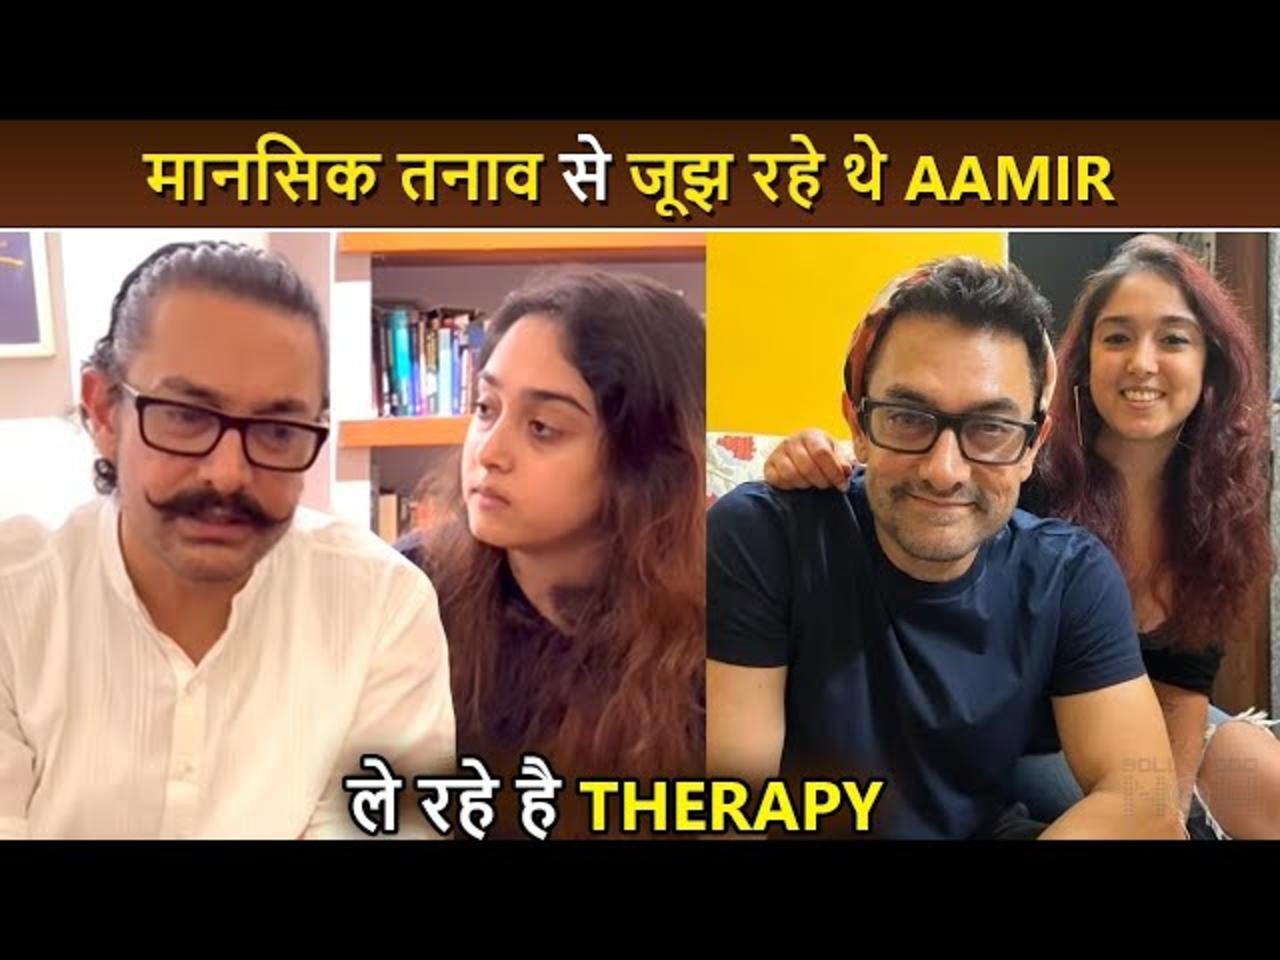 Aamir Khan Opens Up About Going Through Therapy, Shares Video With Daughter Ira